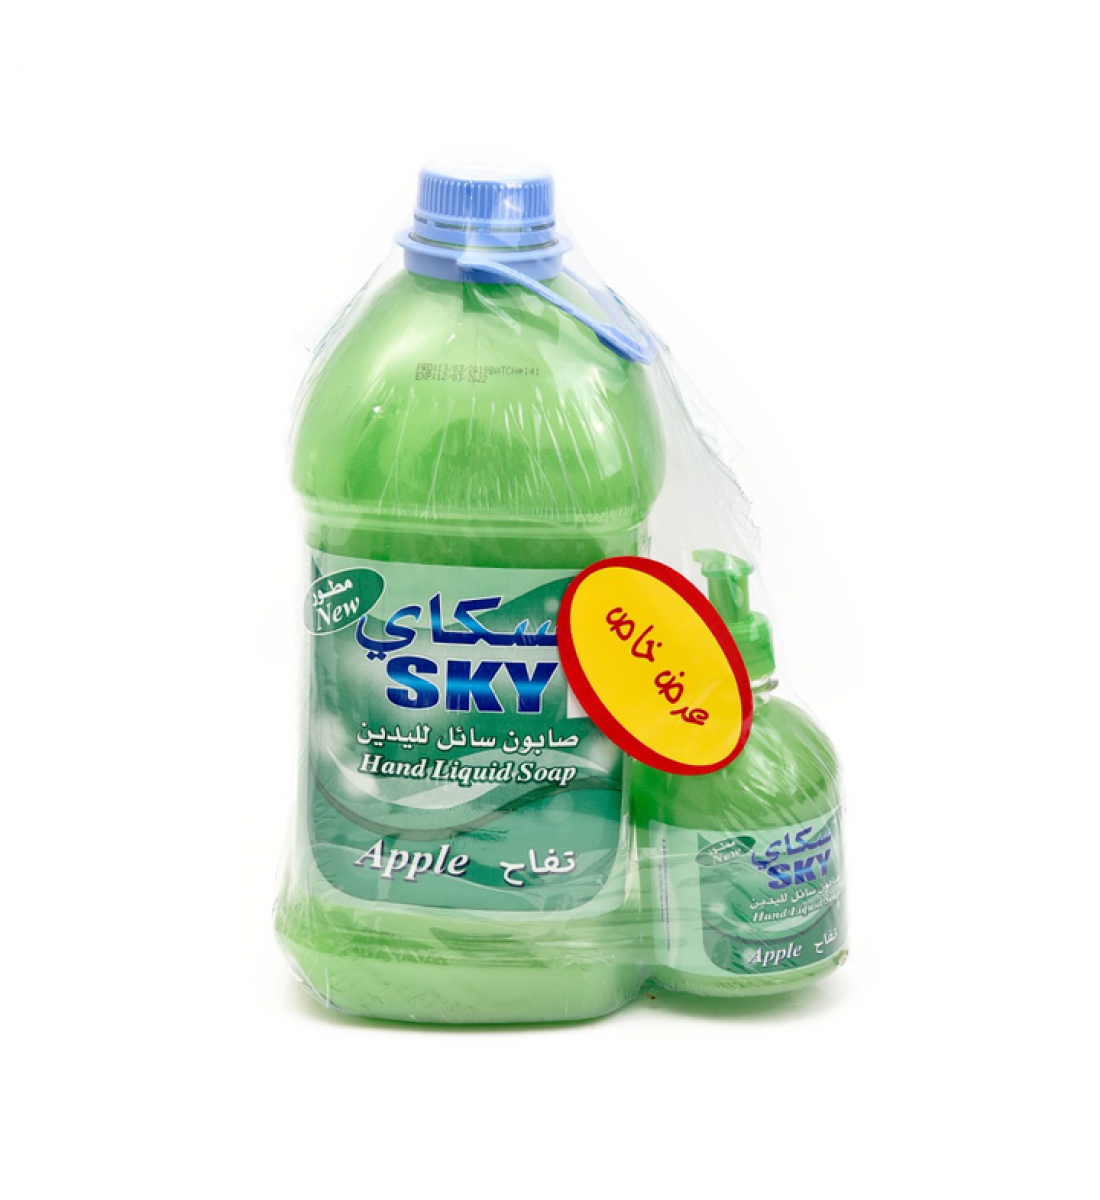 Sky hands soap 3 liter with 400 ml apple scent